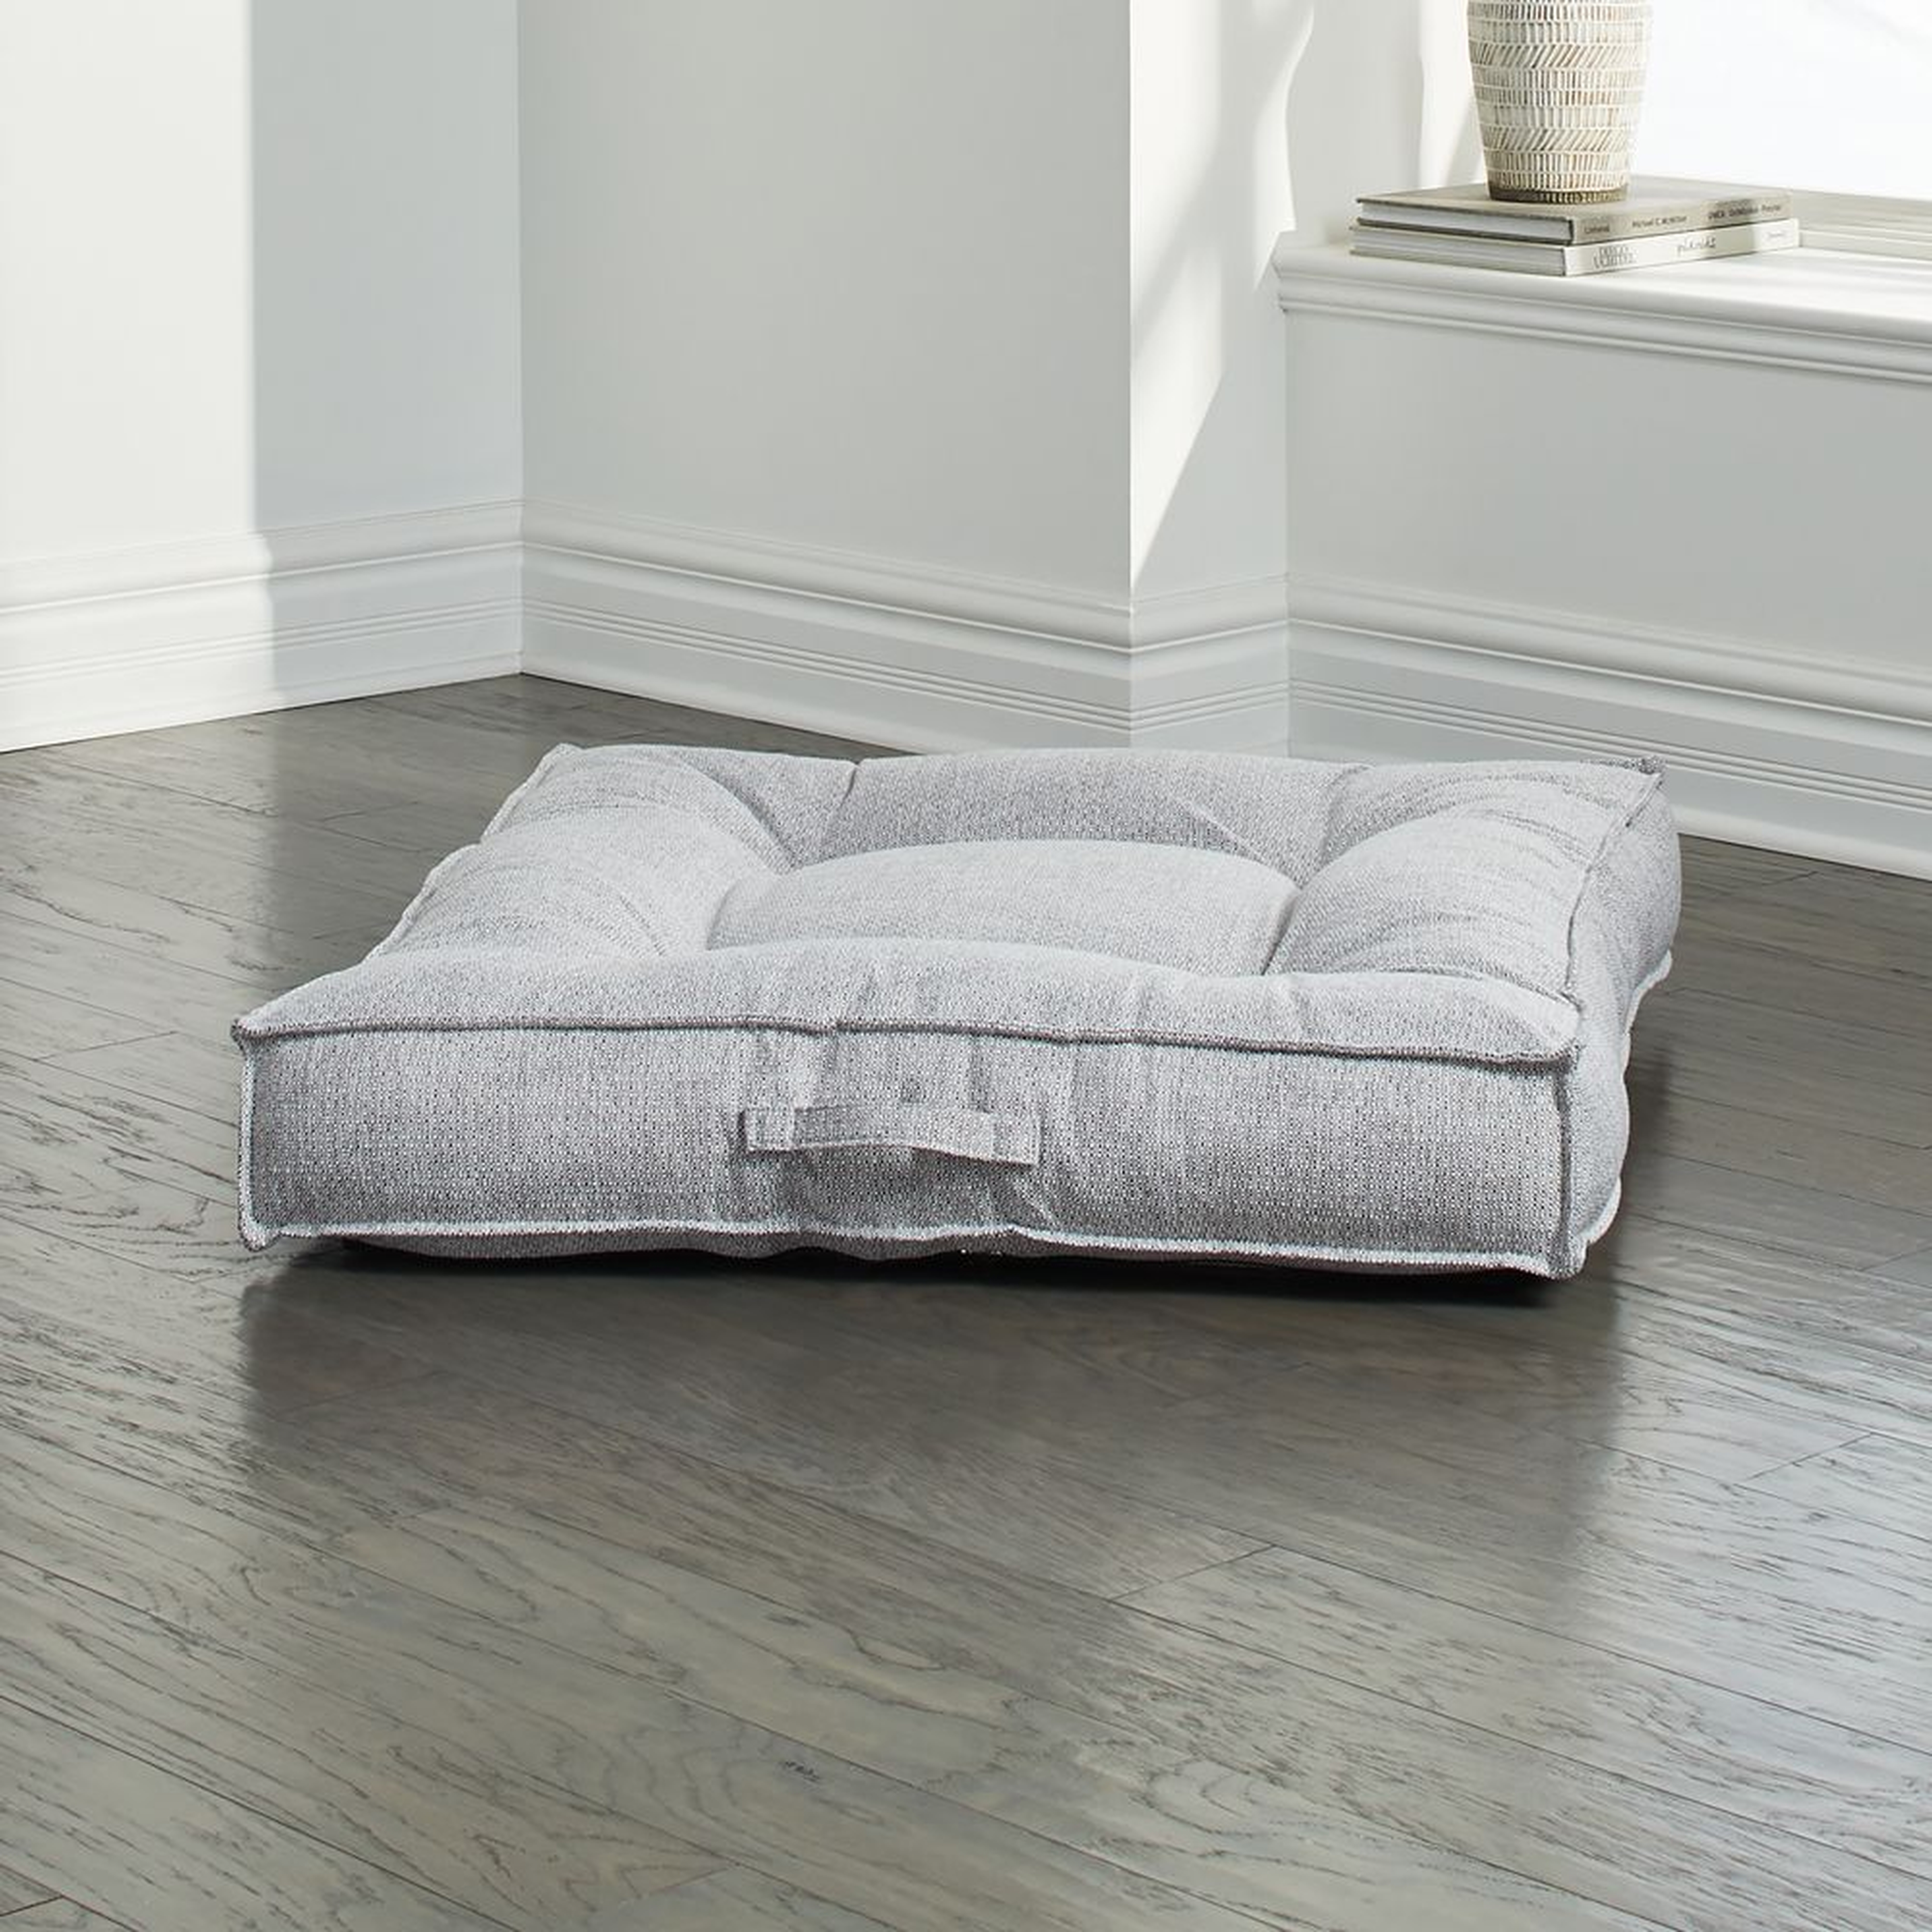 Piazza Large Allumina Tufted Dog Bed - Crate and Barrel